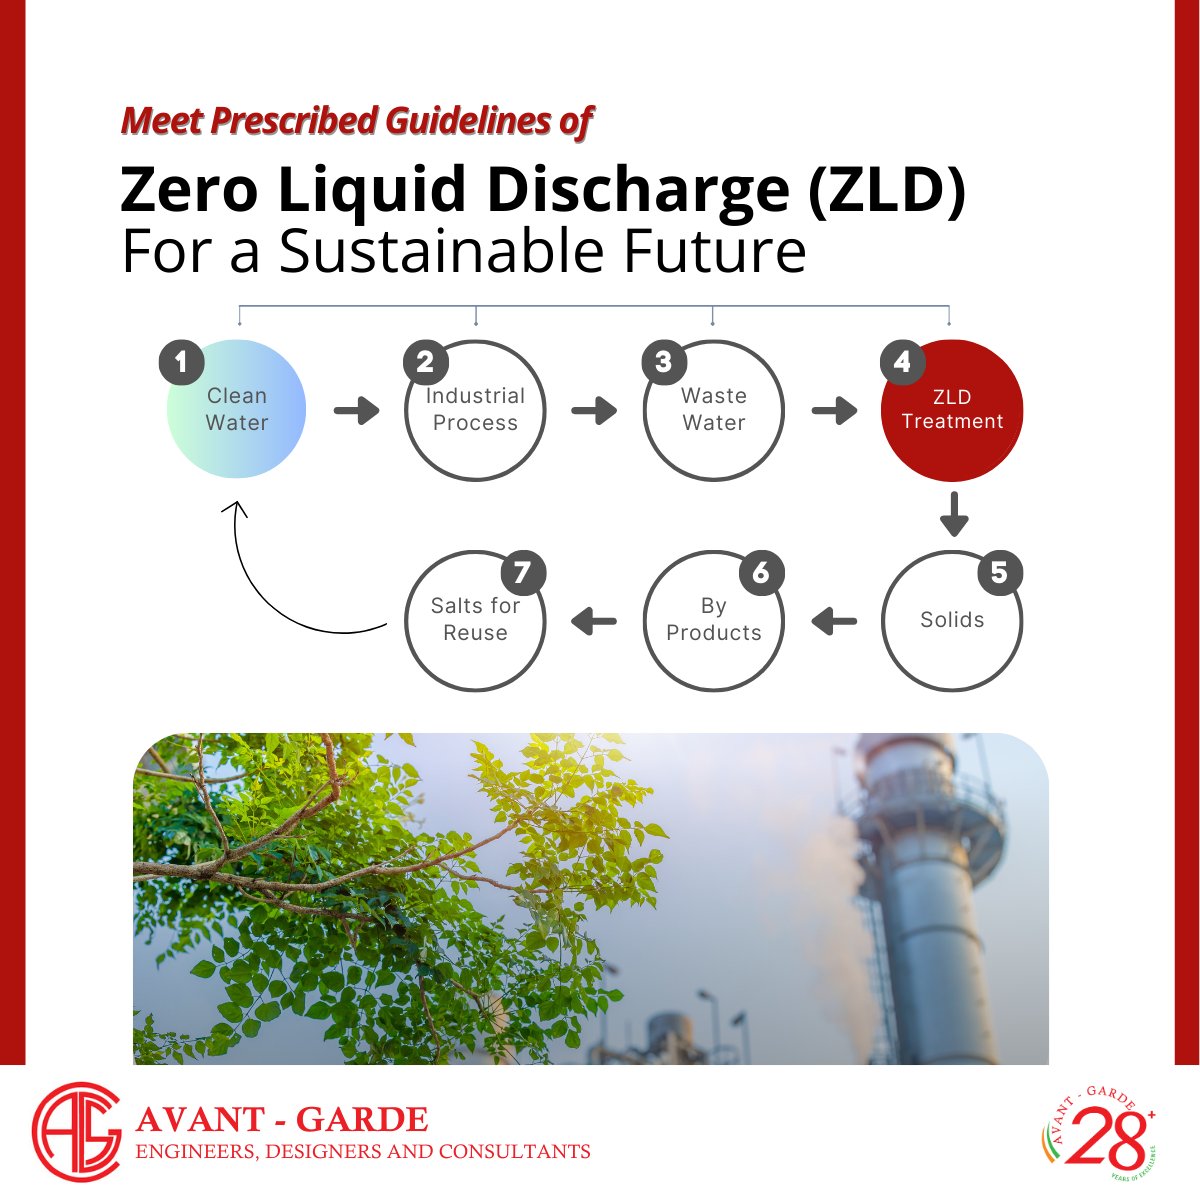 Avant-Garde Engineers, Designers and Consultants help captive power plants and large industries stay committed to their sustainability goals. Zero Liquid Discharge (ZLD) offers multiple benefits #zeroliquiddischarge #sustainability #engineering #manufacturing #avantgarde